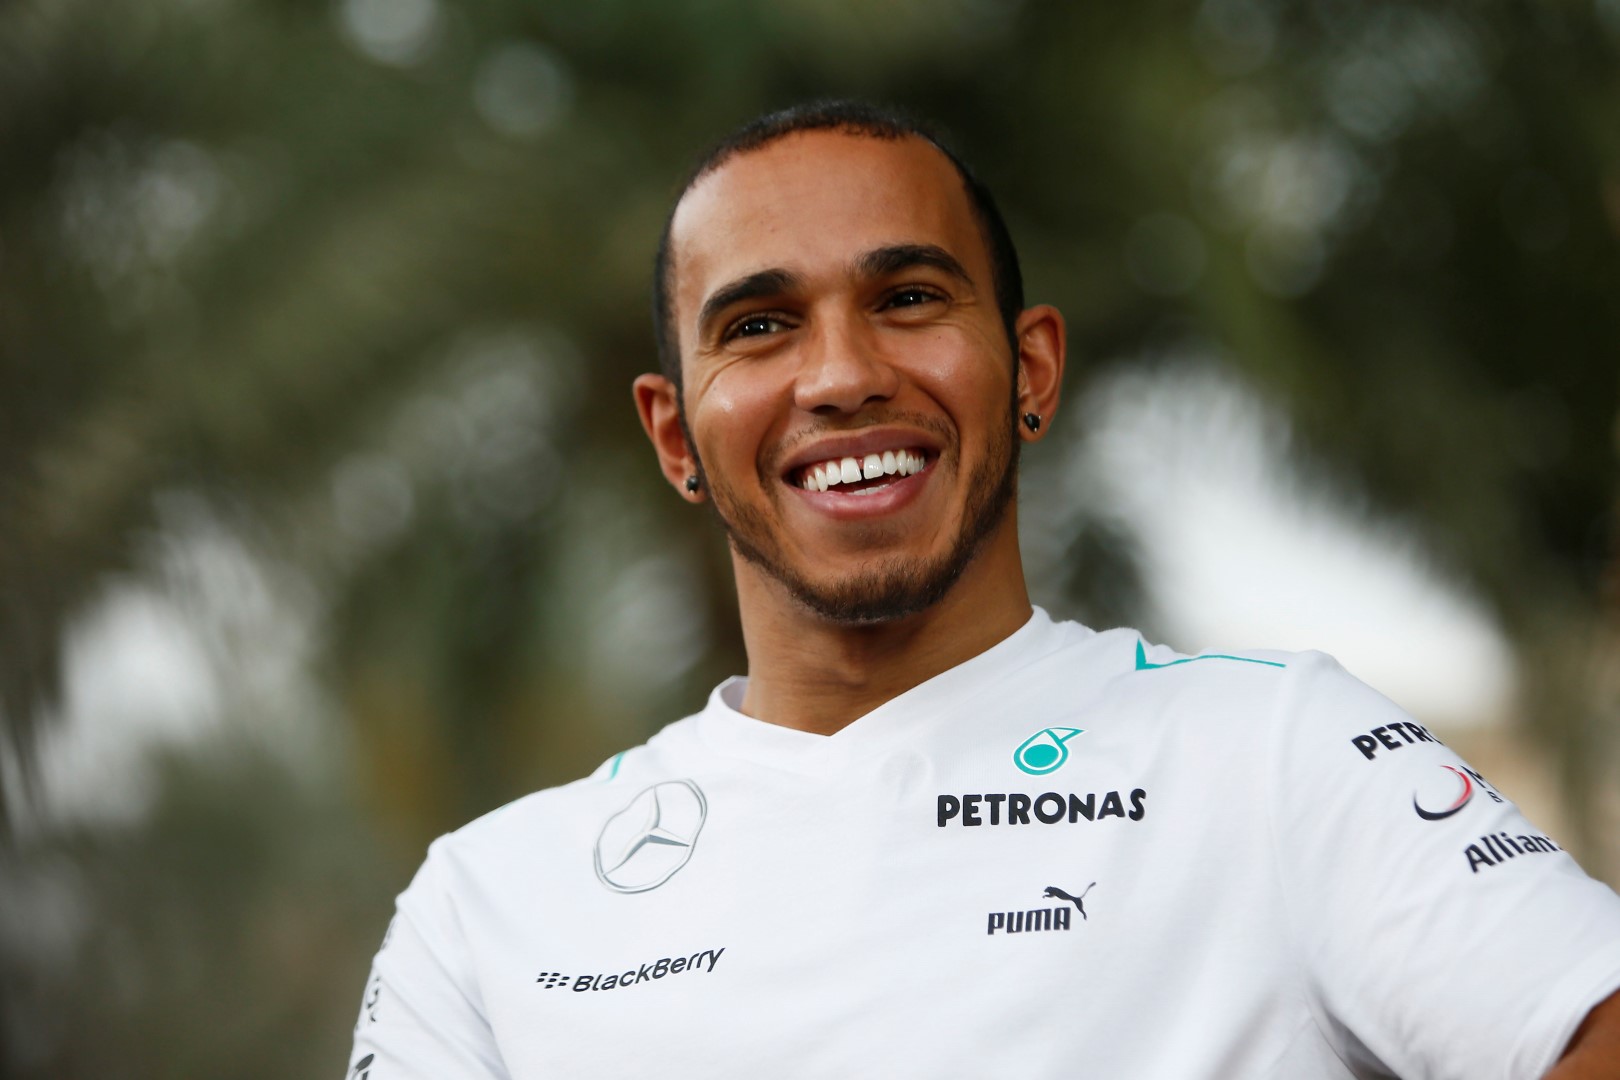 Lewis Hamilton says it’s party time after winning British Grand Prix